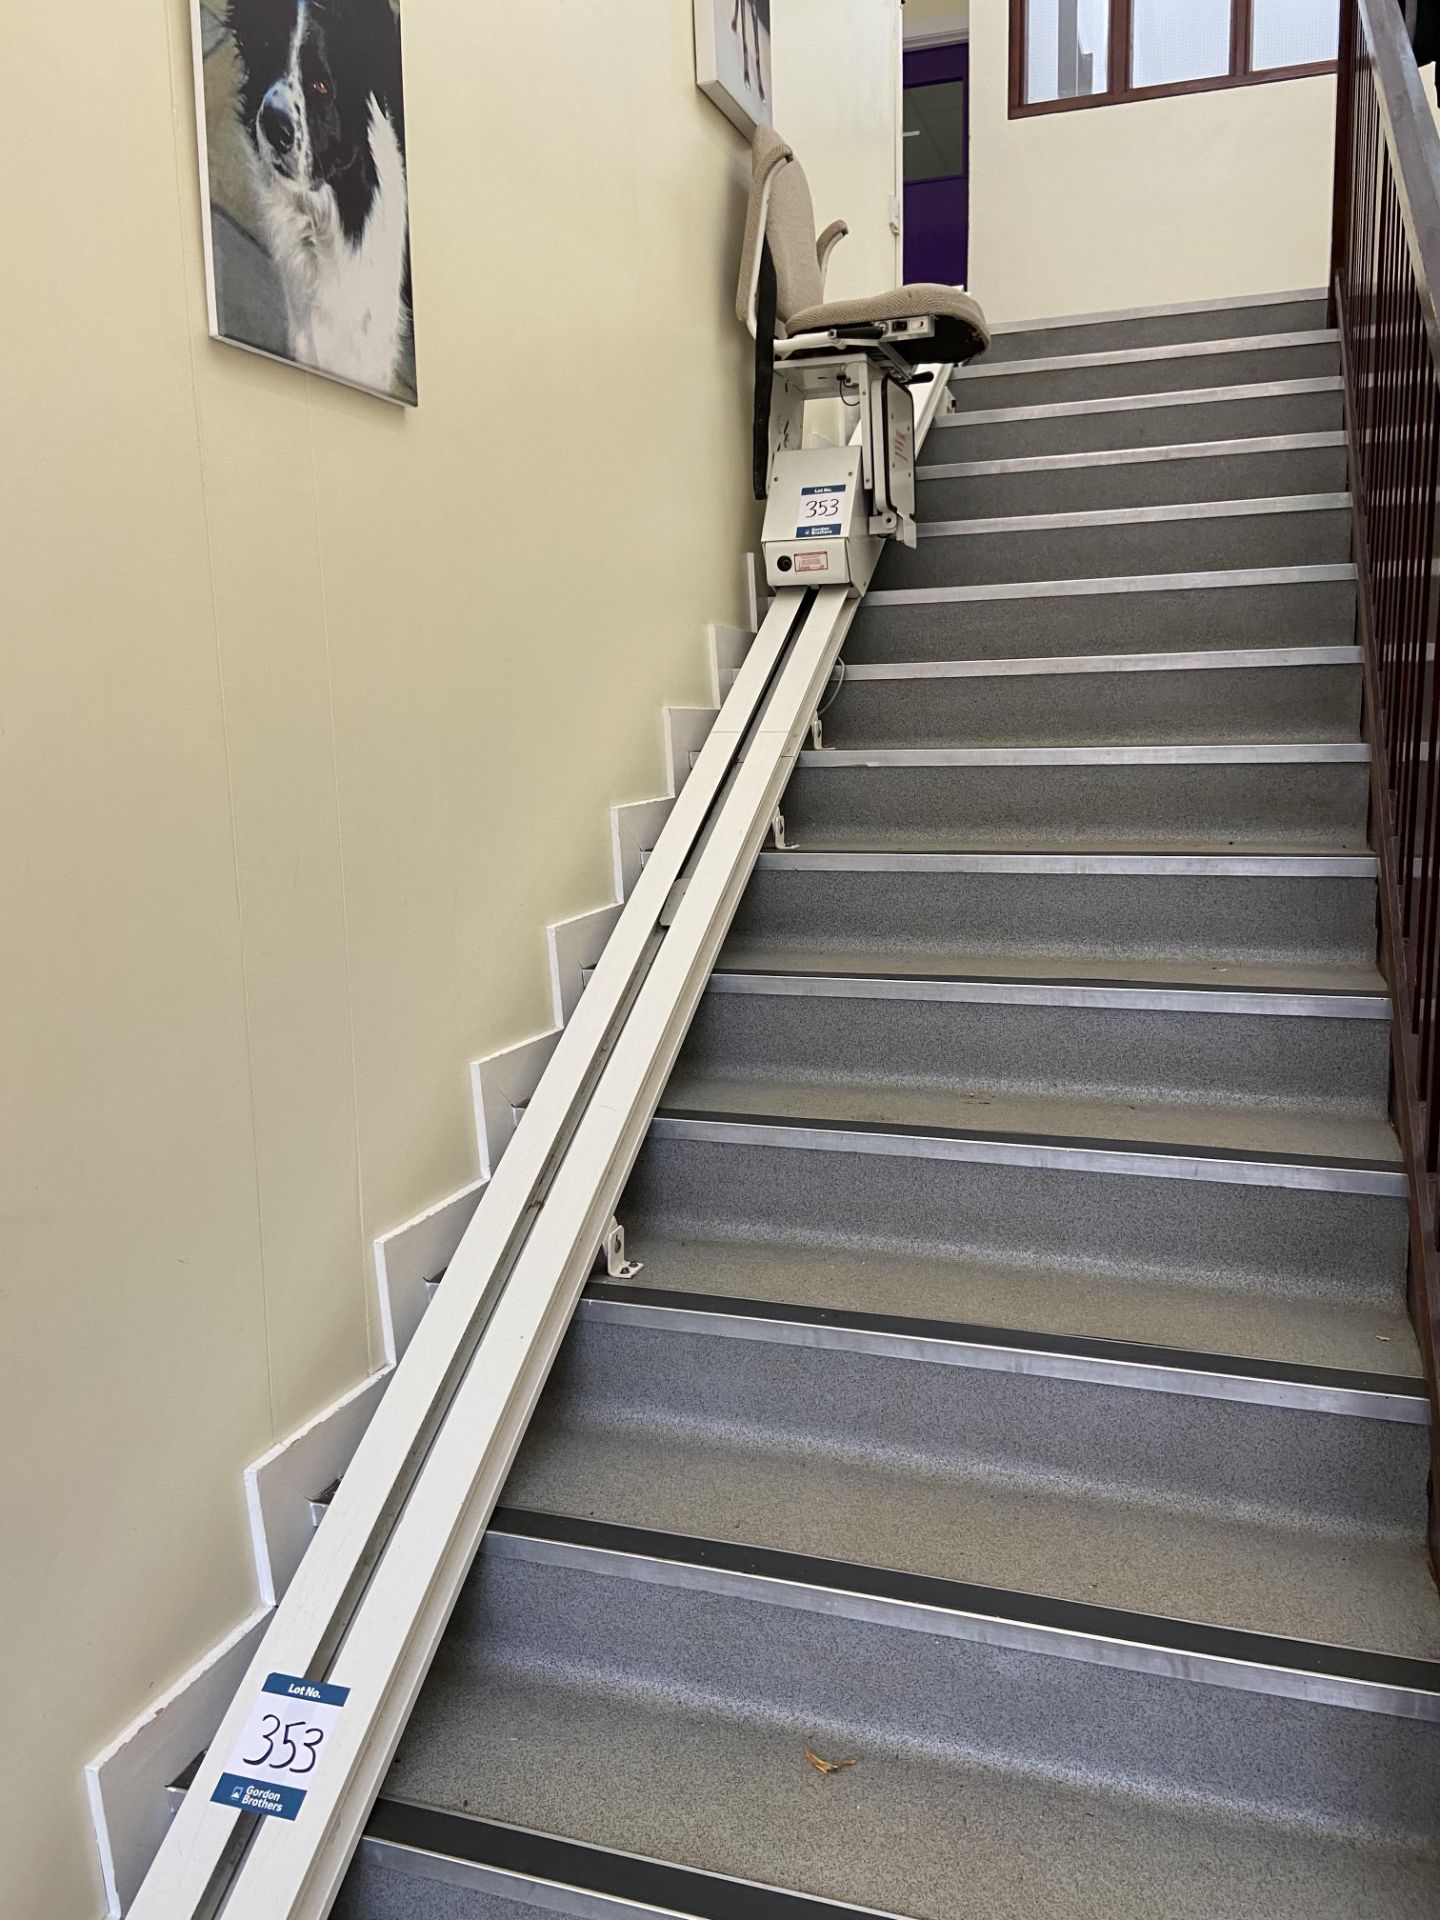 Access Industrial stairlift, track length 5 metres approx. Small Animal Clinic reception stairs - Image 3 of 3